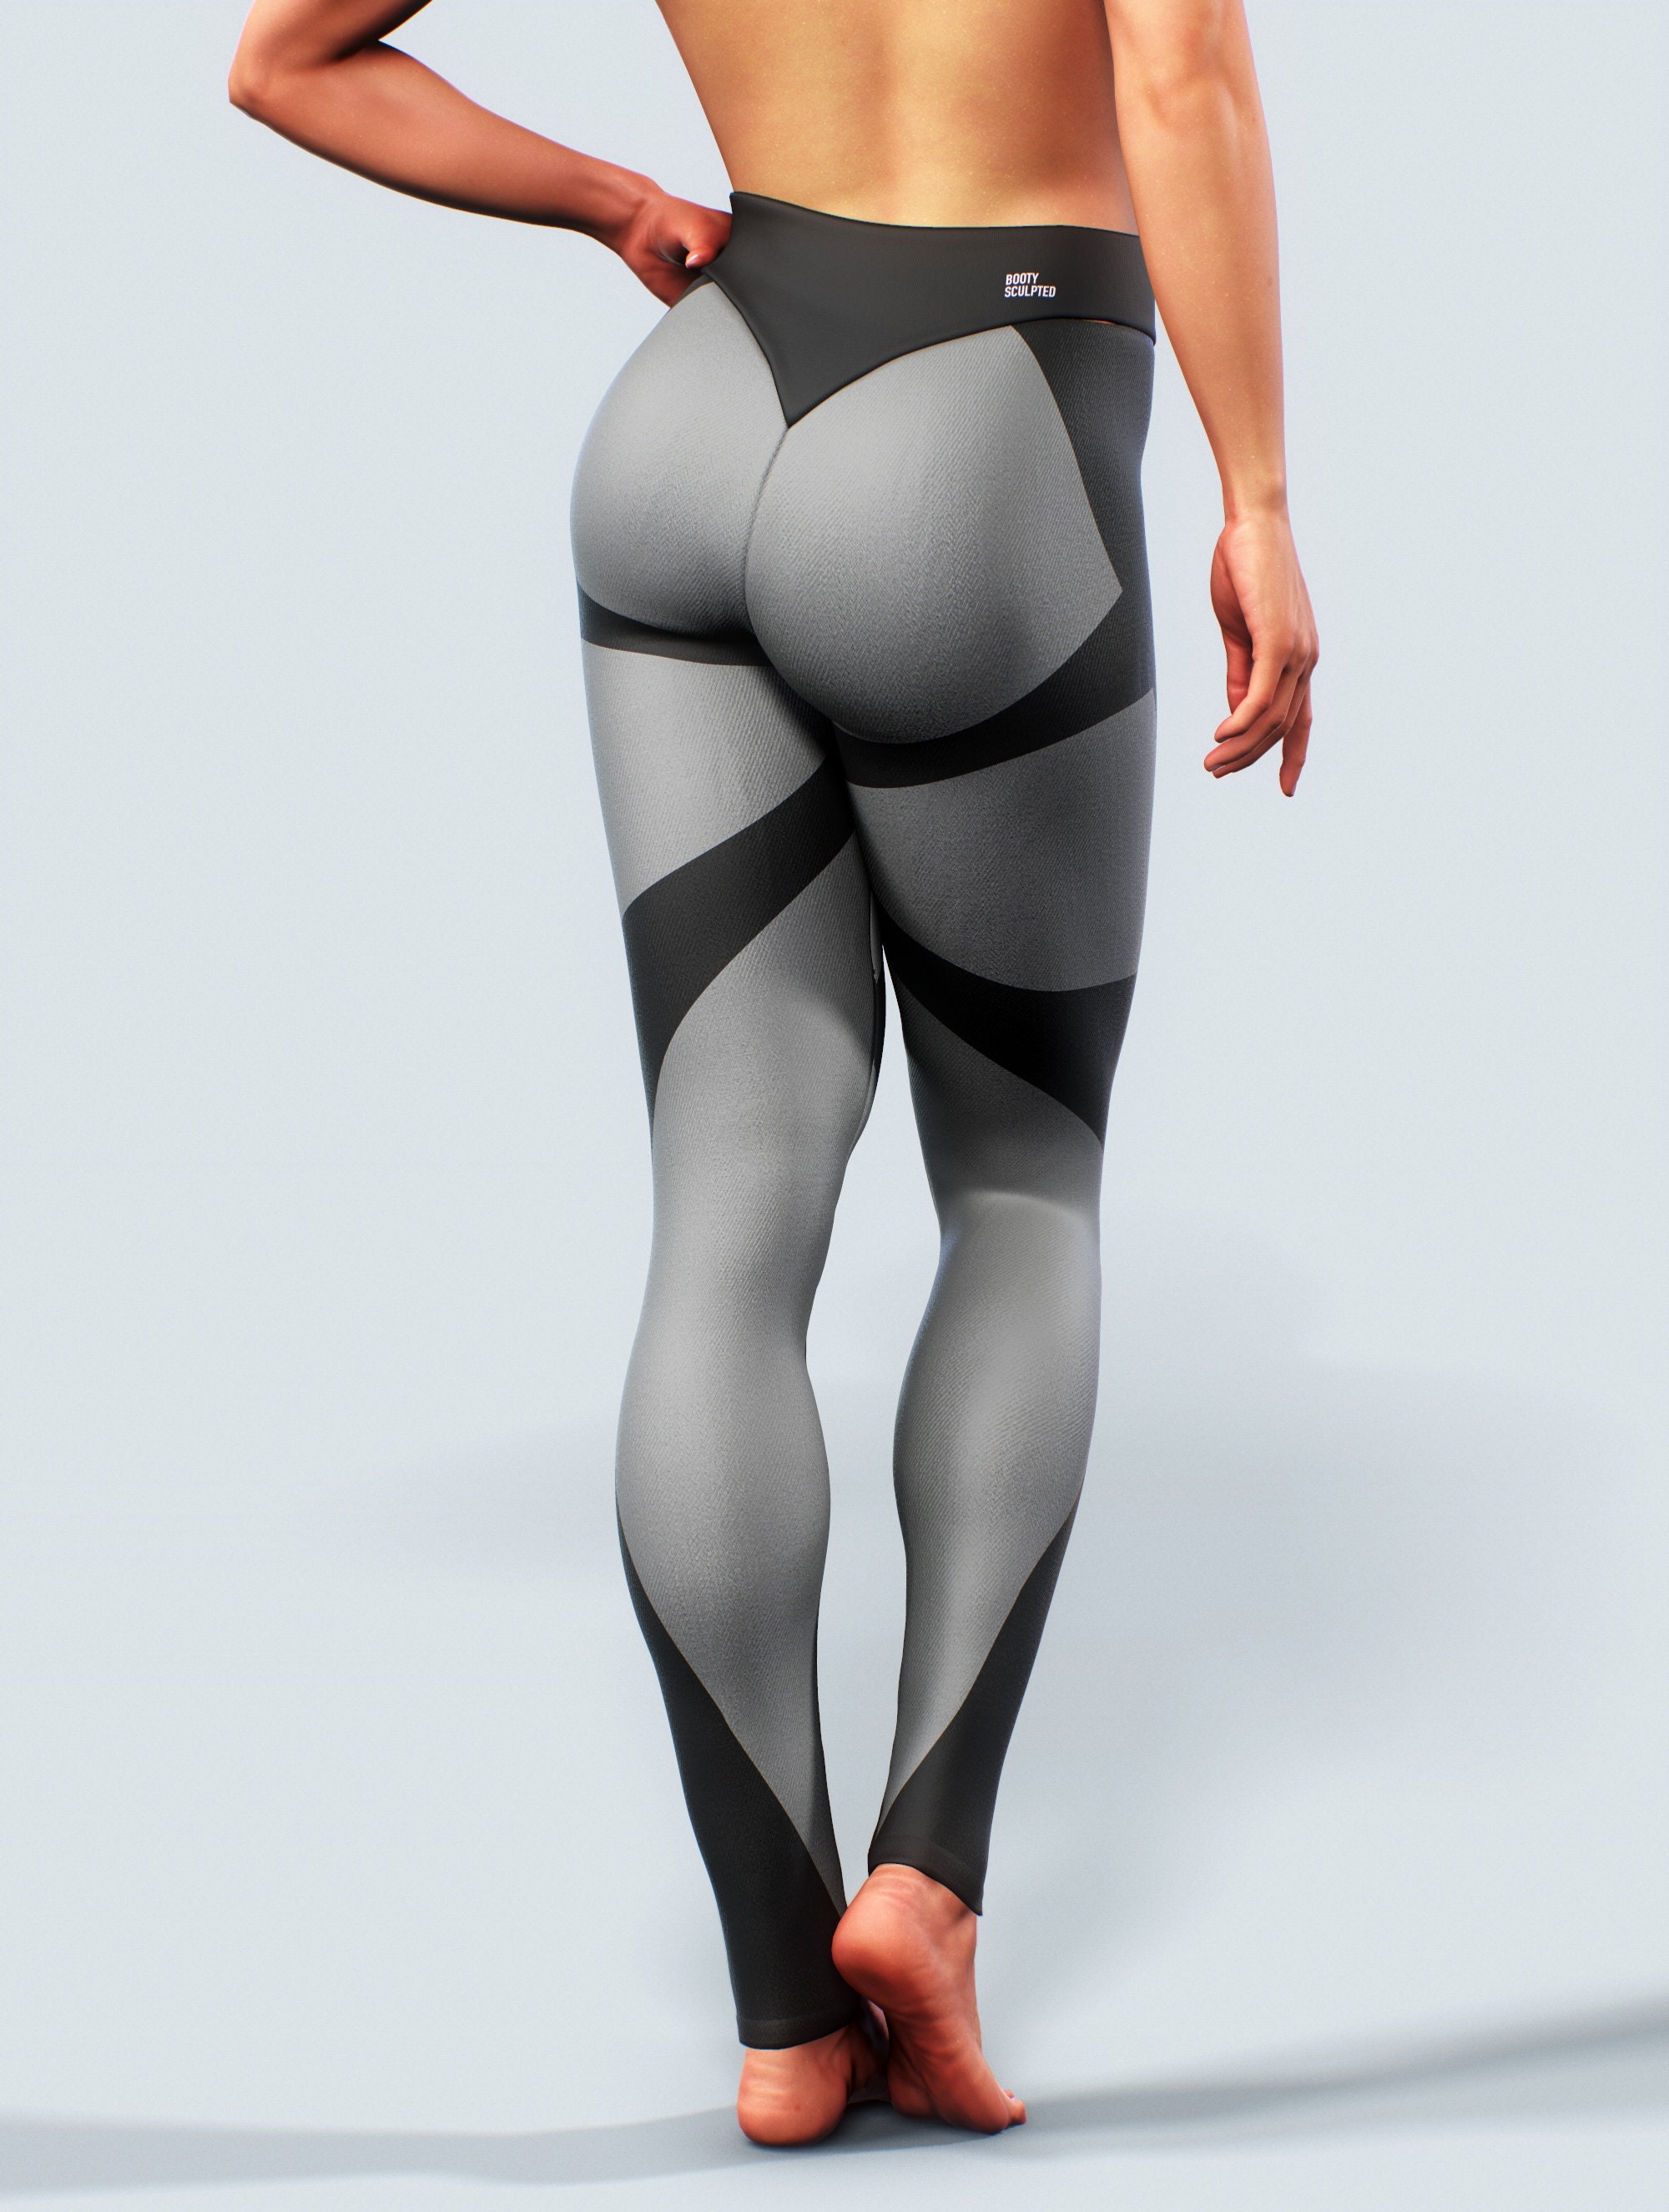 Women's Yoga Leggings with Butt Seamless Booty Tight for Wife Daughter  Mother Friend M Gray